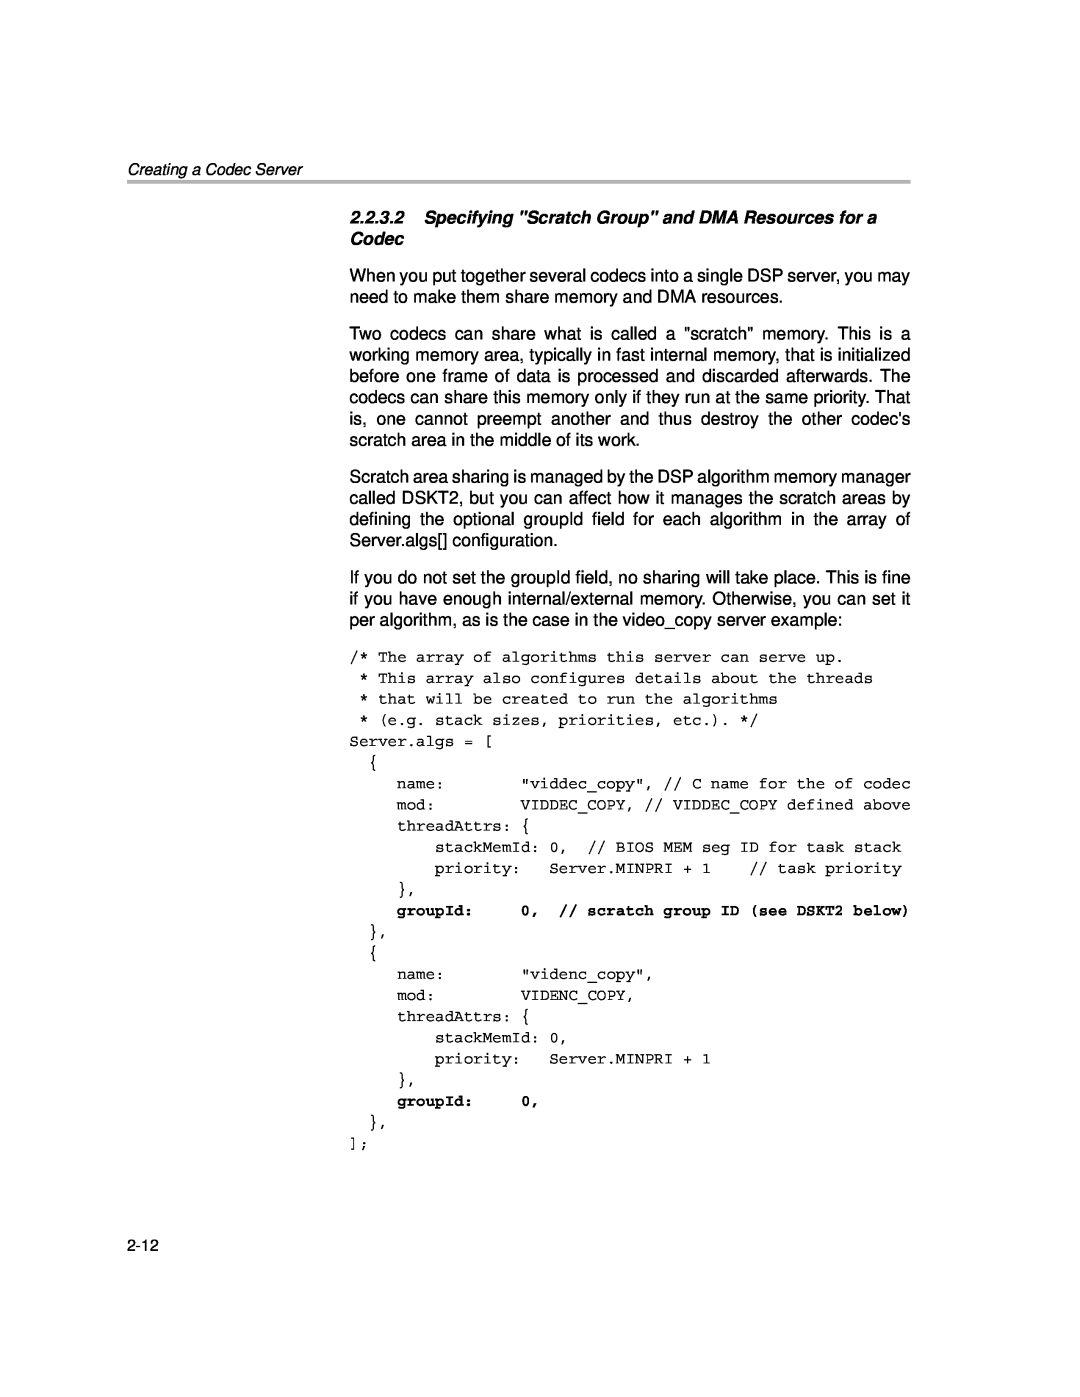 Texas Instruments Codec Engine Server manual Specifying Scratch Group and DMA Resources for a Codec 